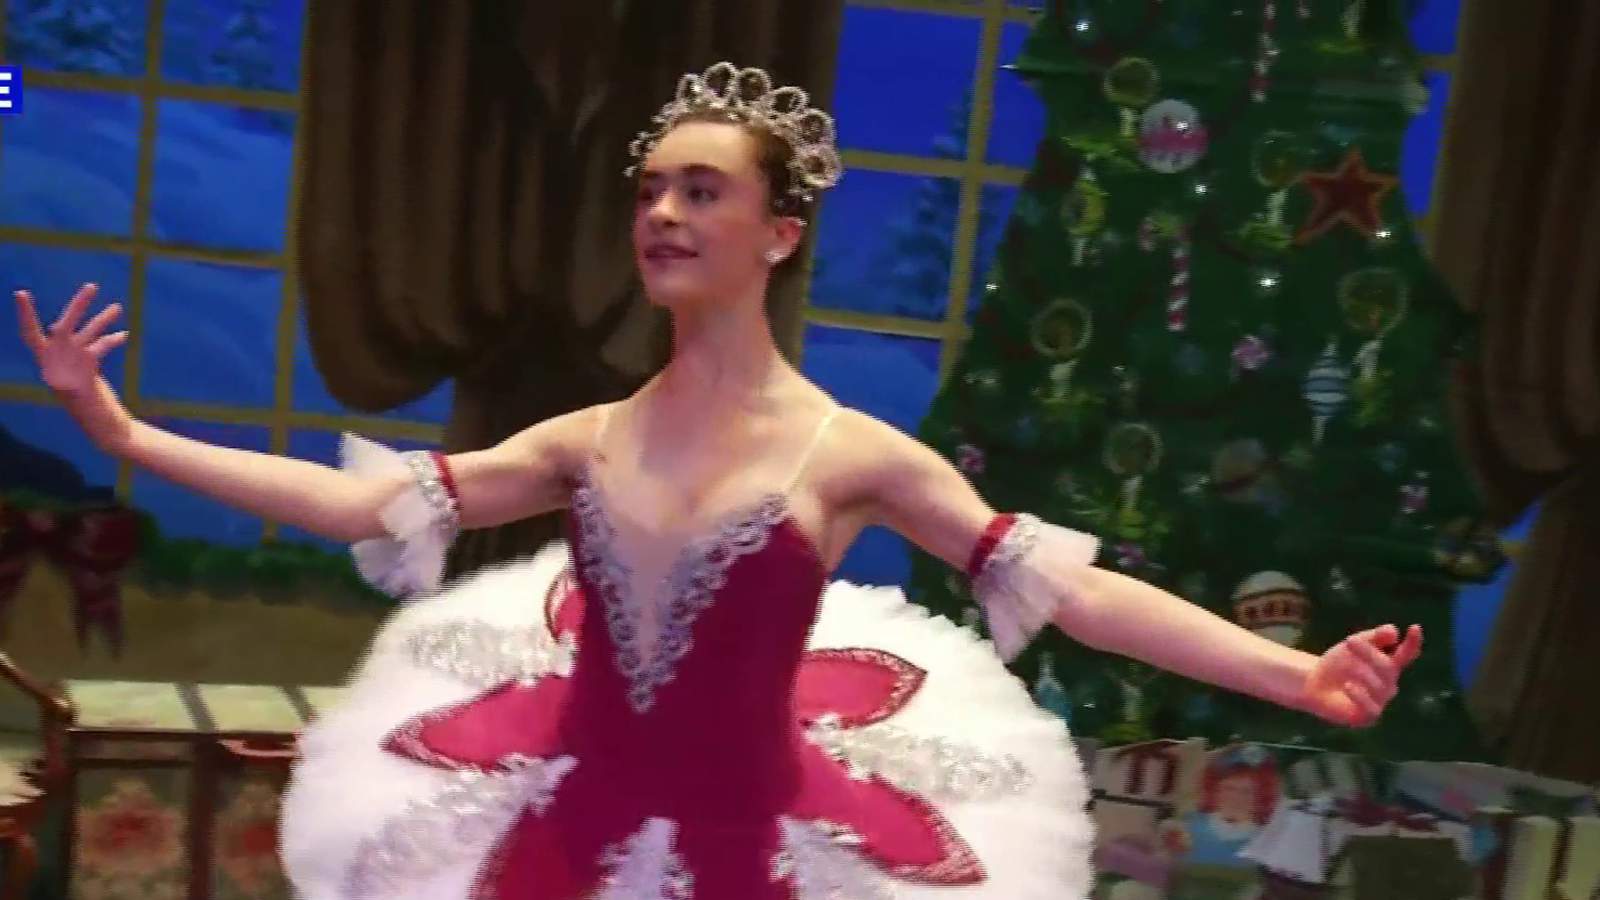 Southwest Virginia Ballet presents ‘The Nutcracker’ at the Berglund Center this weekend